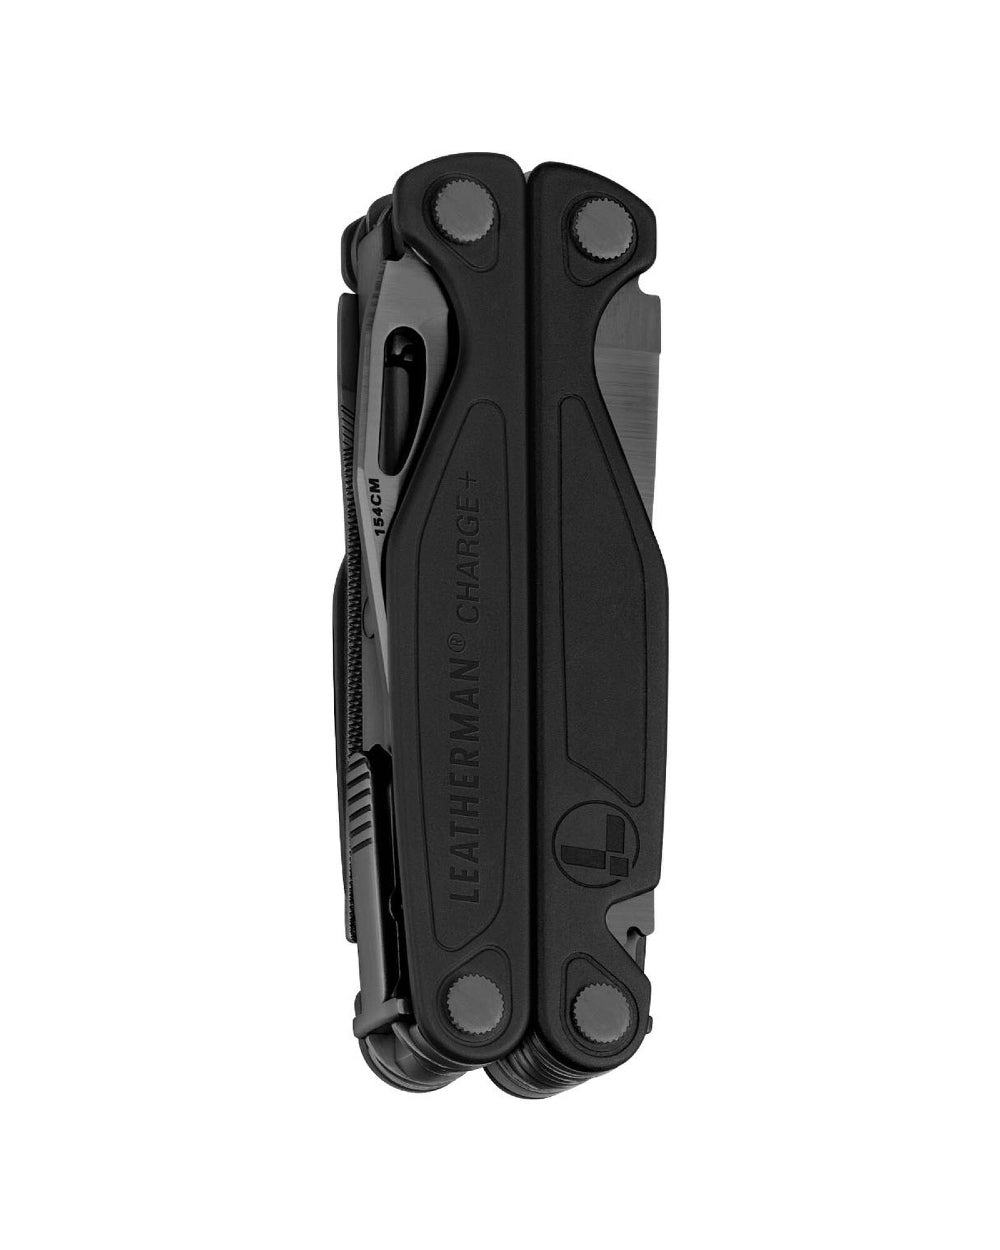 Leatherman Charge+ Multi-Tool in Black Oxide 